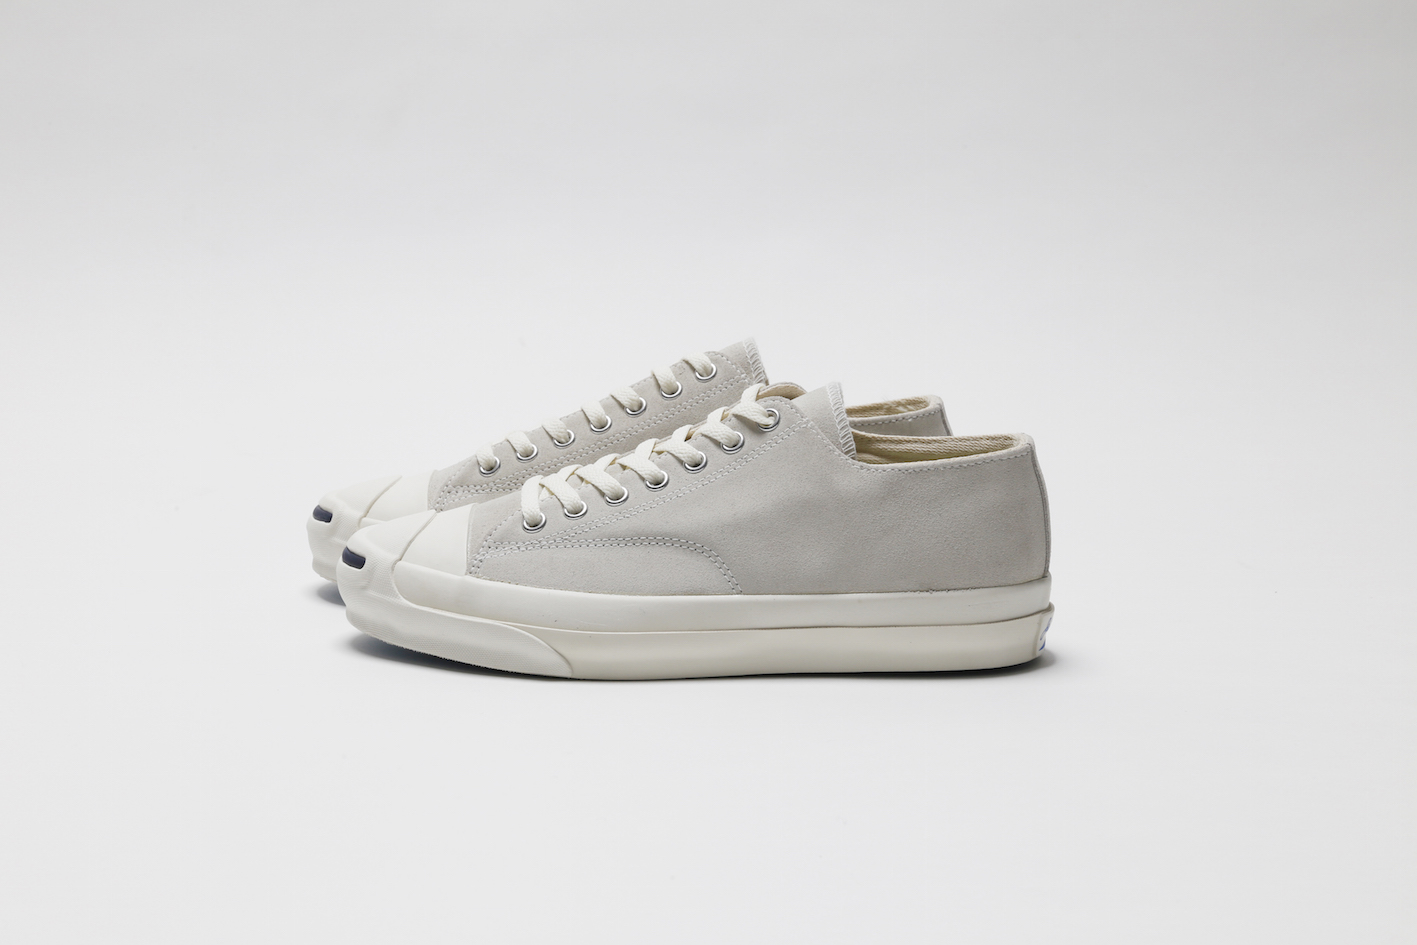 TimeLineシリーズ“JACK PURCELL 80 SUEDE”待望のホワイトカラーが登場｜CONVERSE